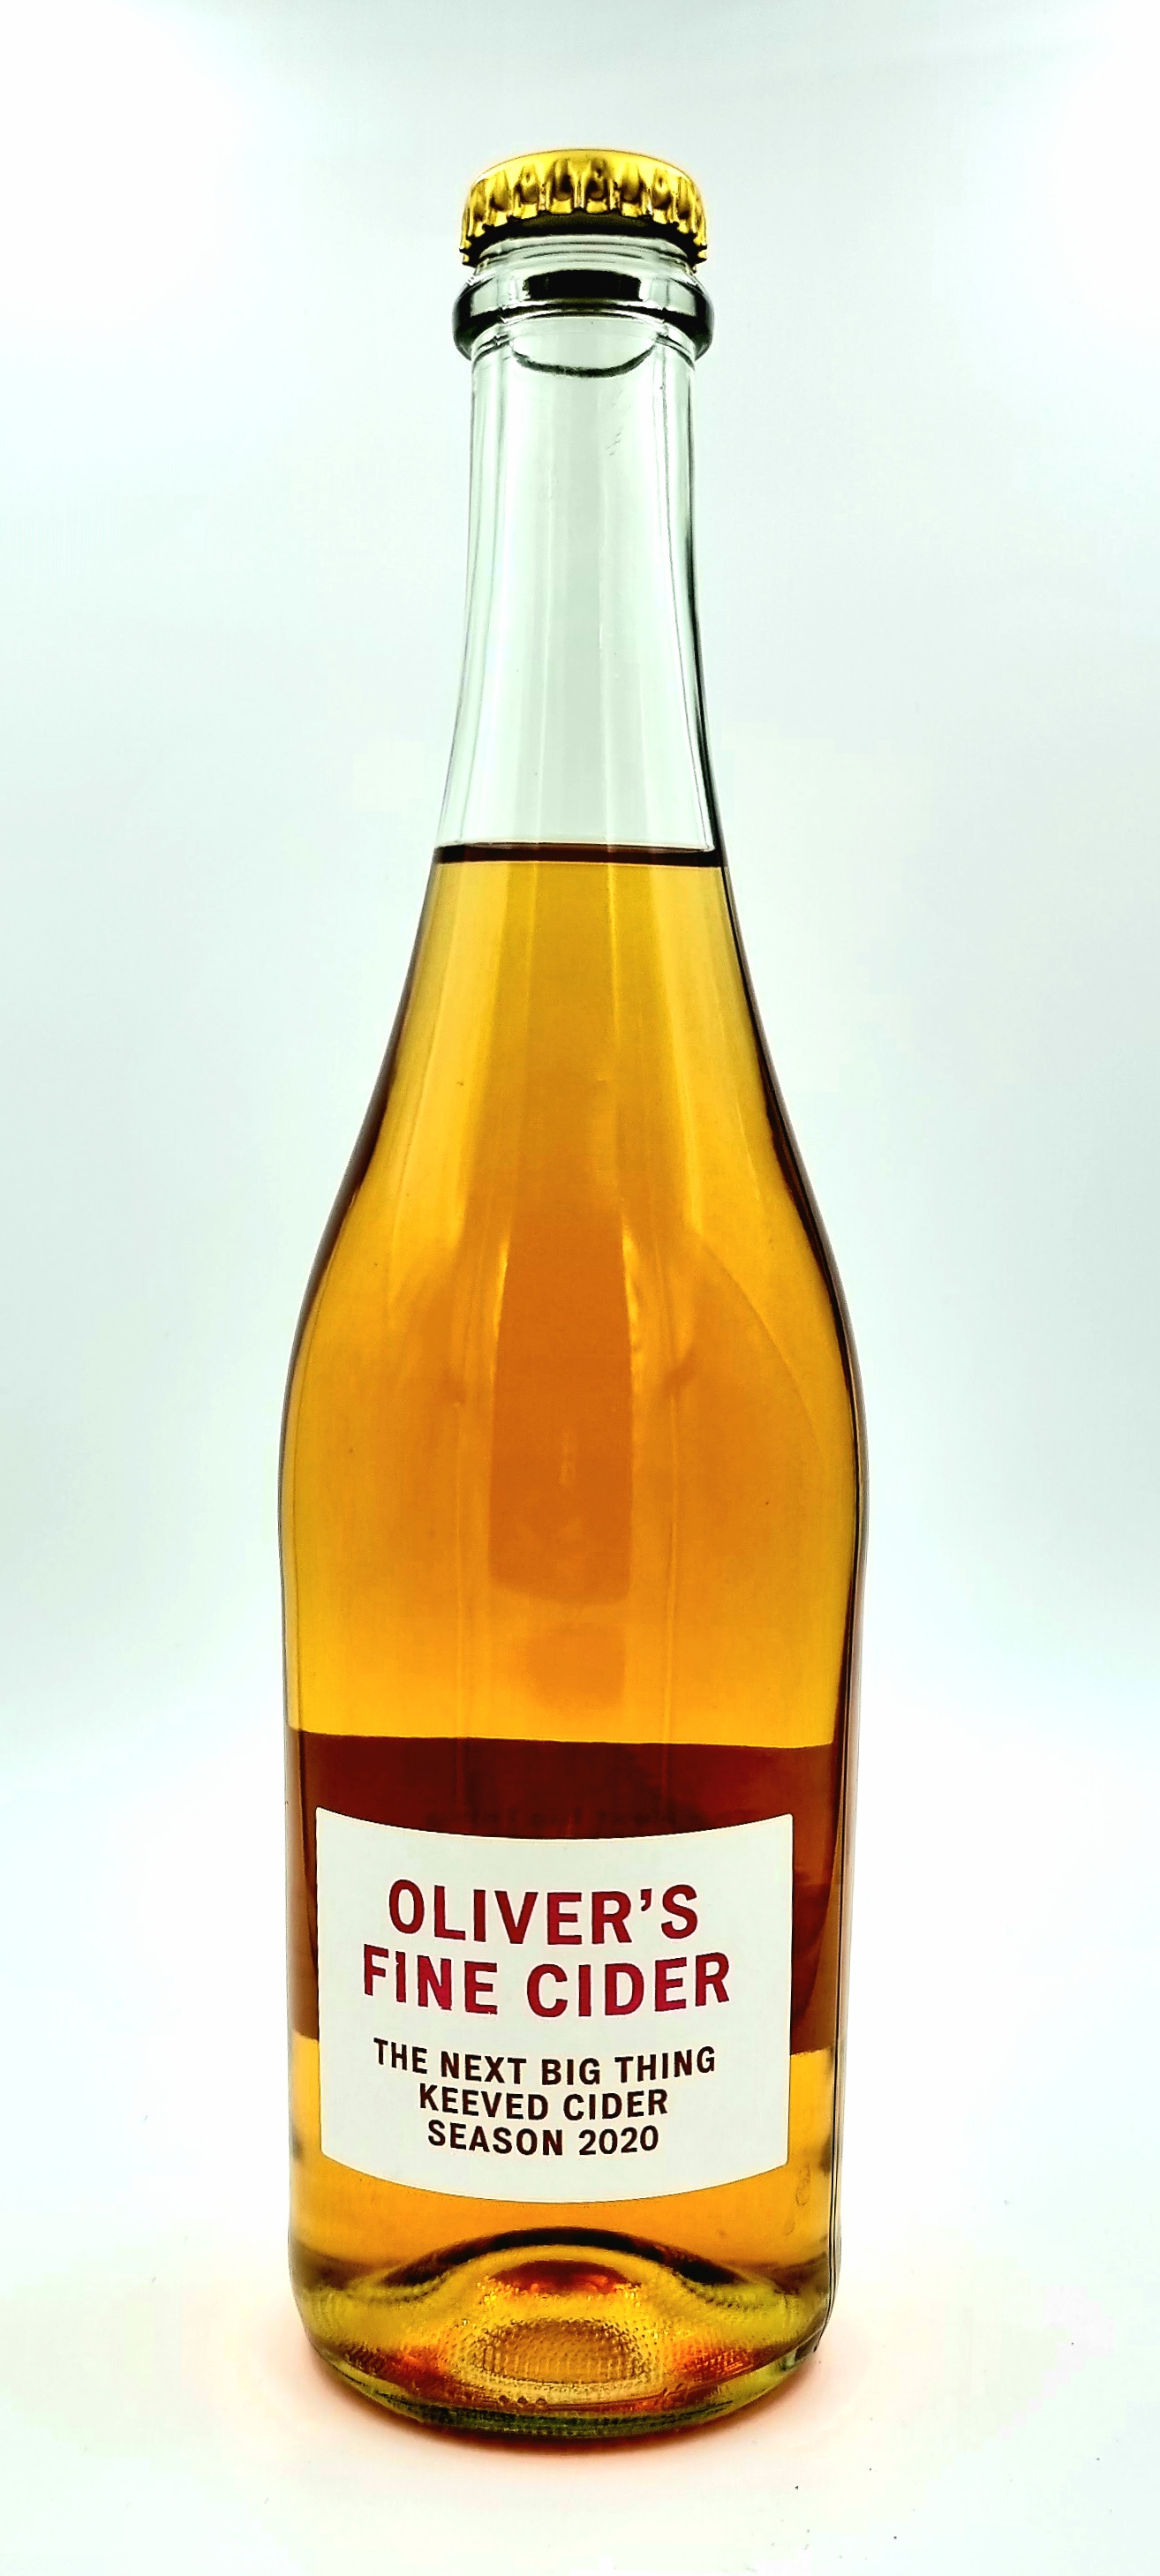 FINE CIDER THE NEXT BIG THING KEEVED CIDER SEASON 2020 (750ml) 2.8%